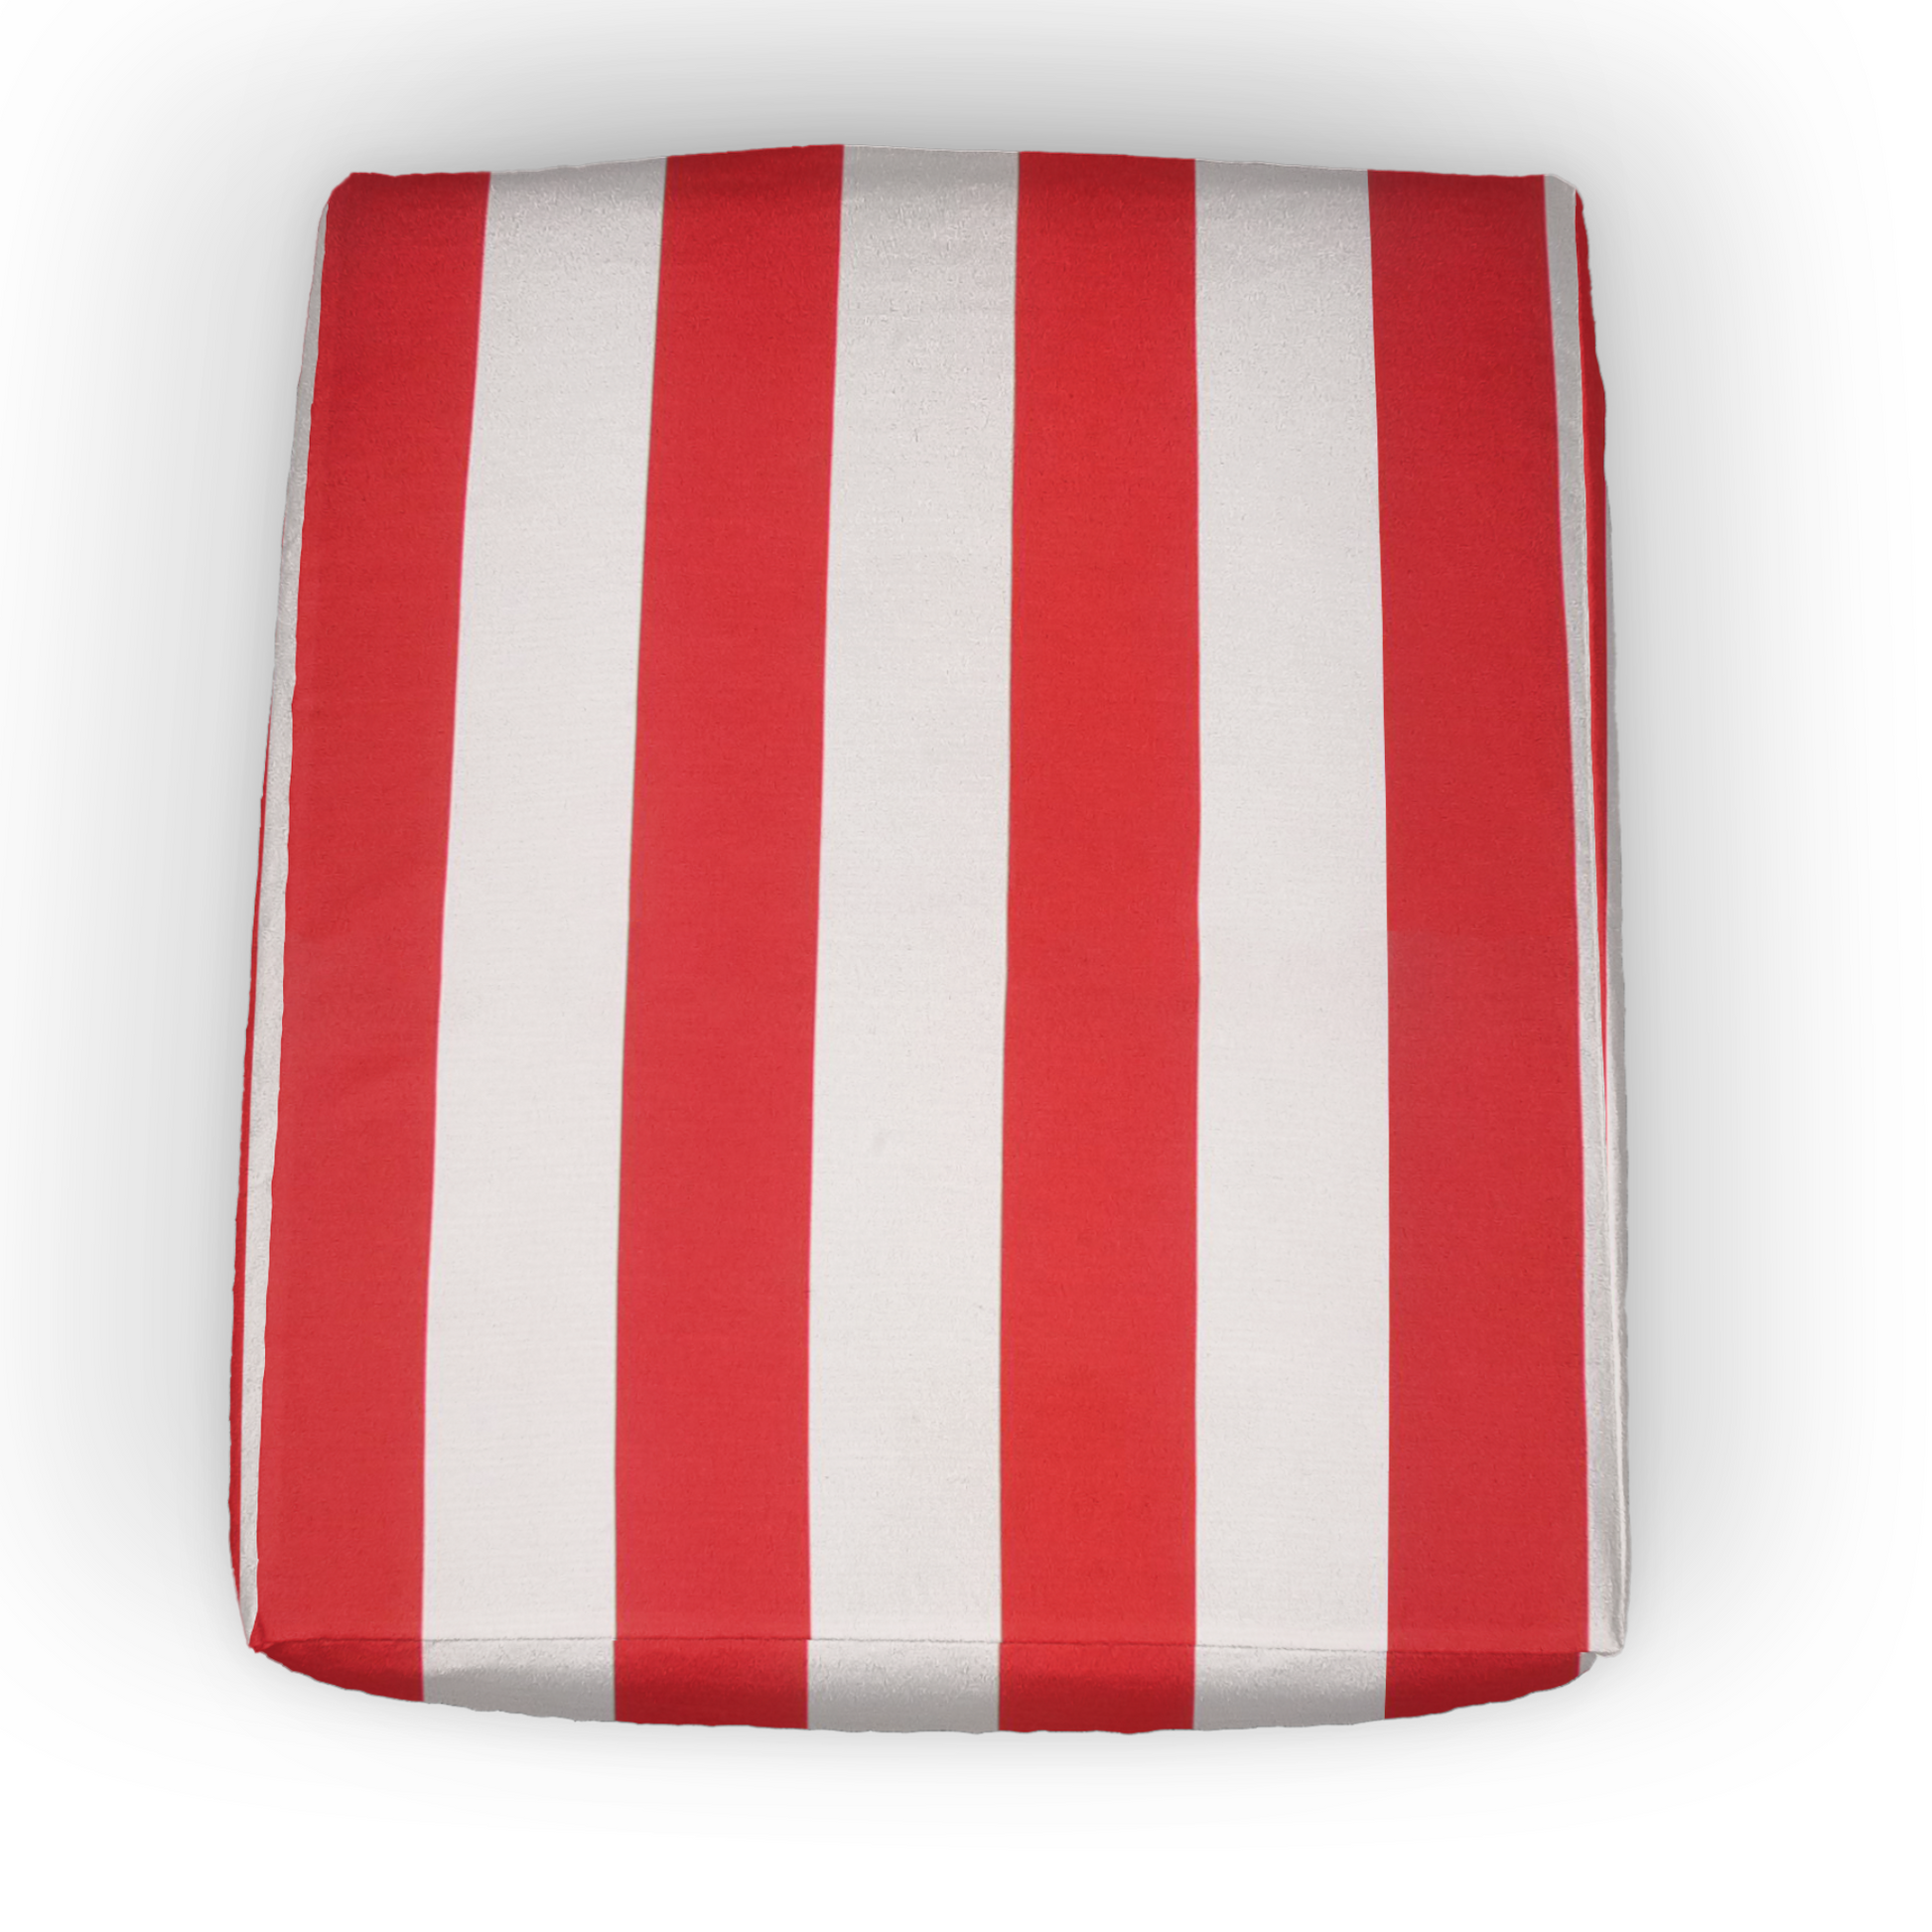 Custom Elastic Fitted Cushion Covers, Outdoor Furniture Covers, Patio Furniture Covers, Patio Chair Covers, Outdoor Chair Covers - Cabana Stripe